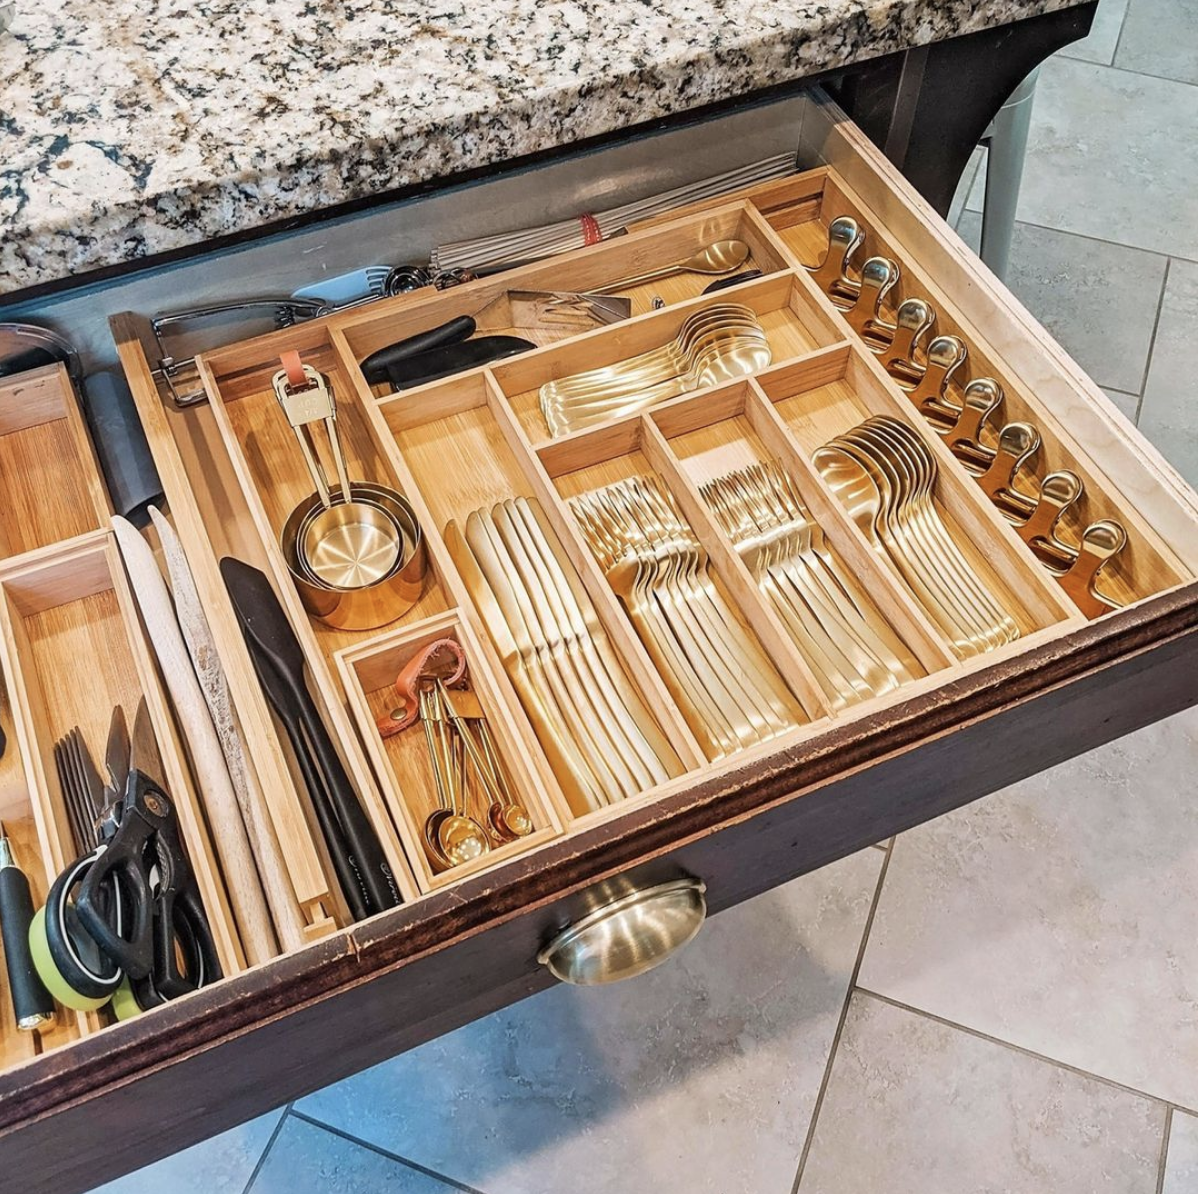 How to Organize Drawers: Organization Tips for Every Room